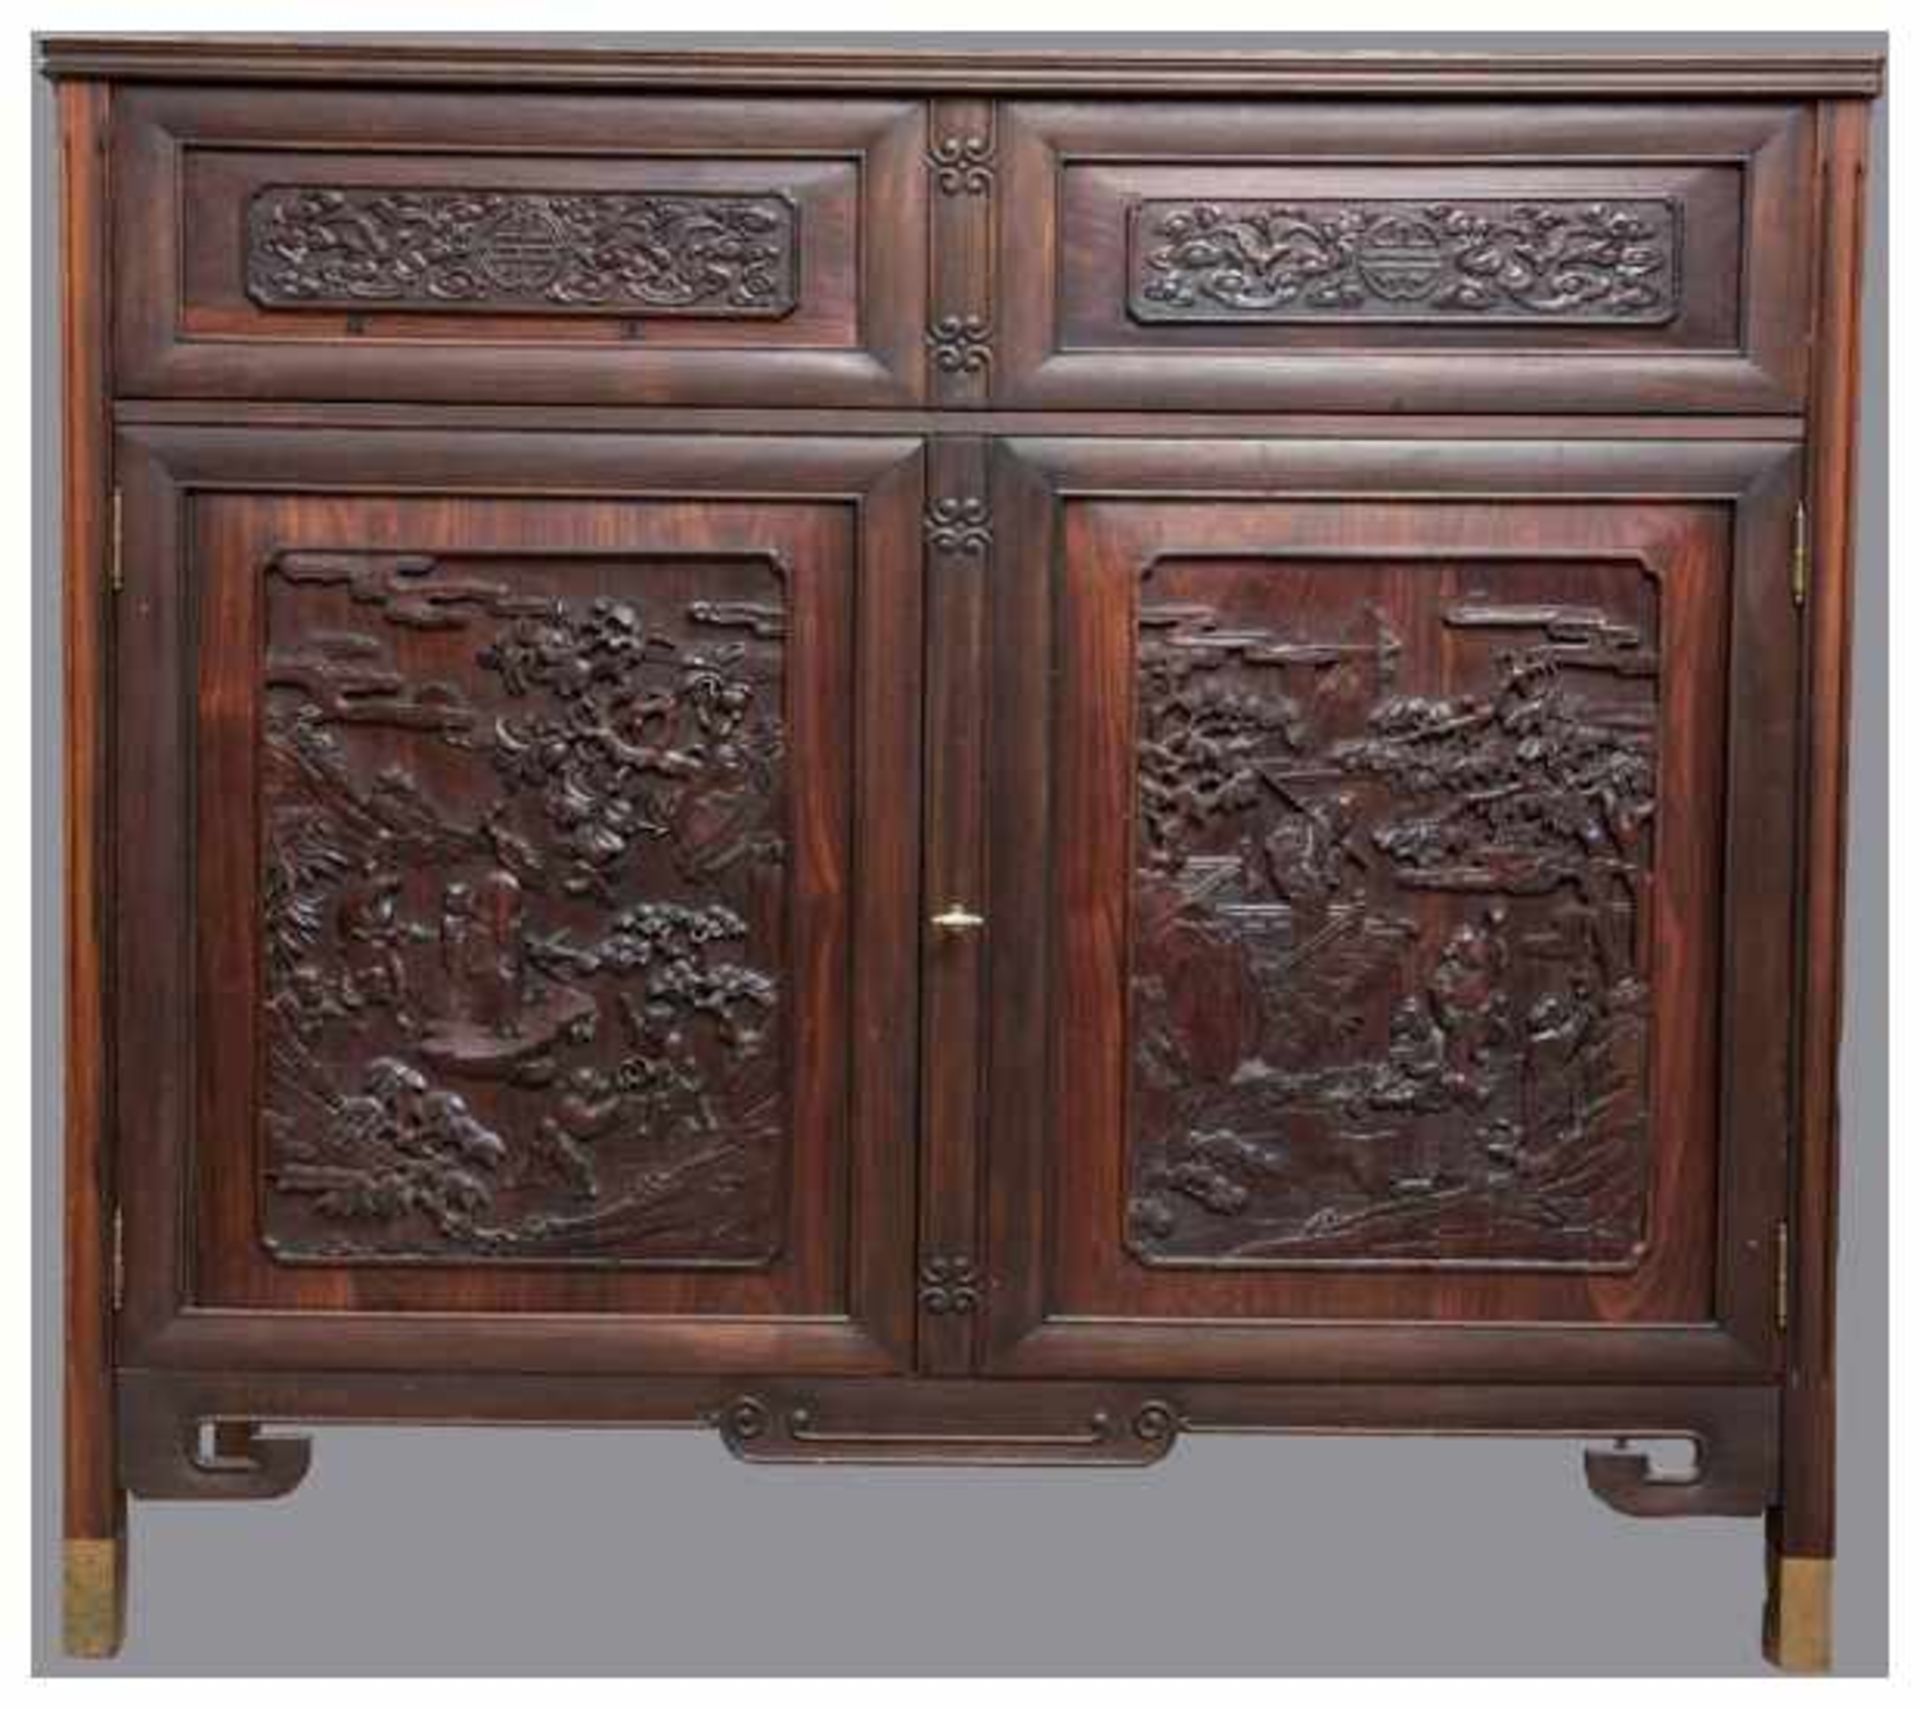 AN ELEGANT DARK HARDWOOD CABINET Hardwood, brass. China, 20th CenturyFinely carved in relief with